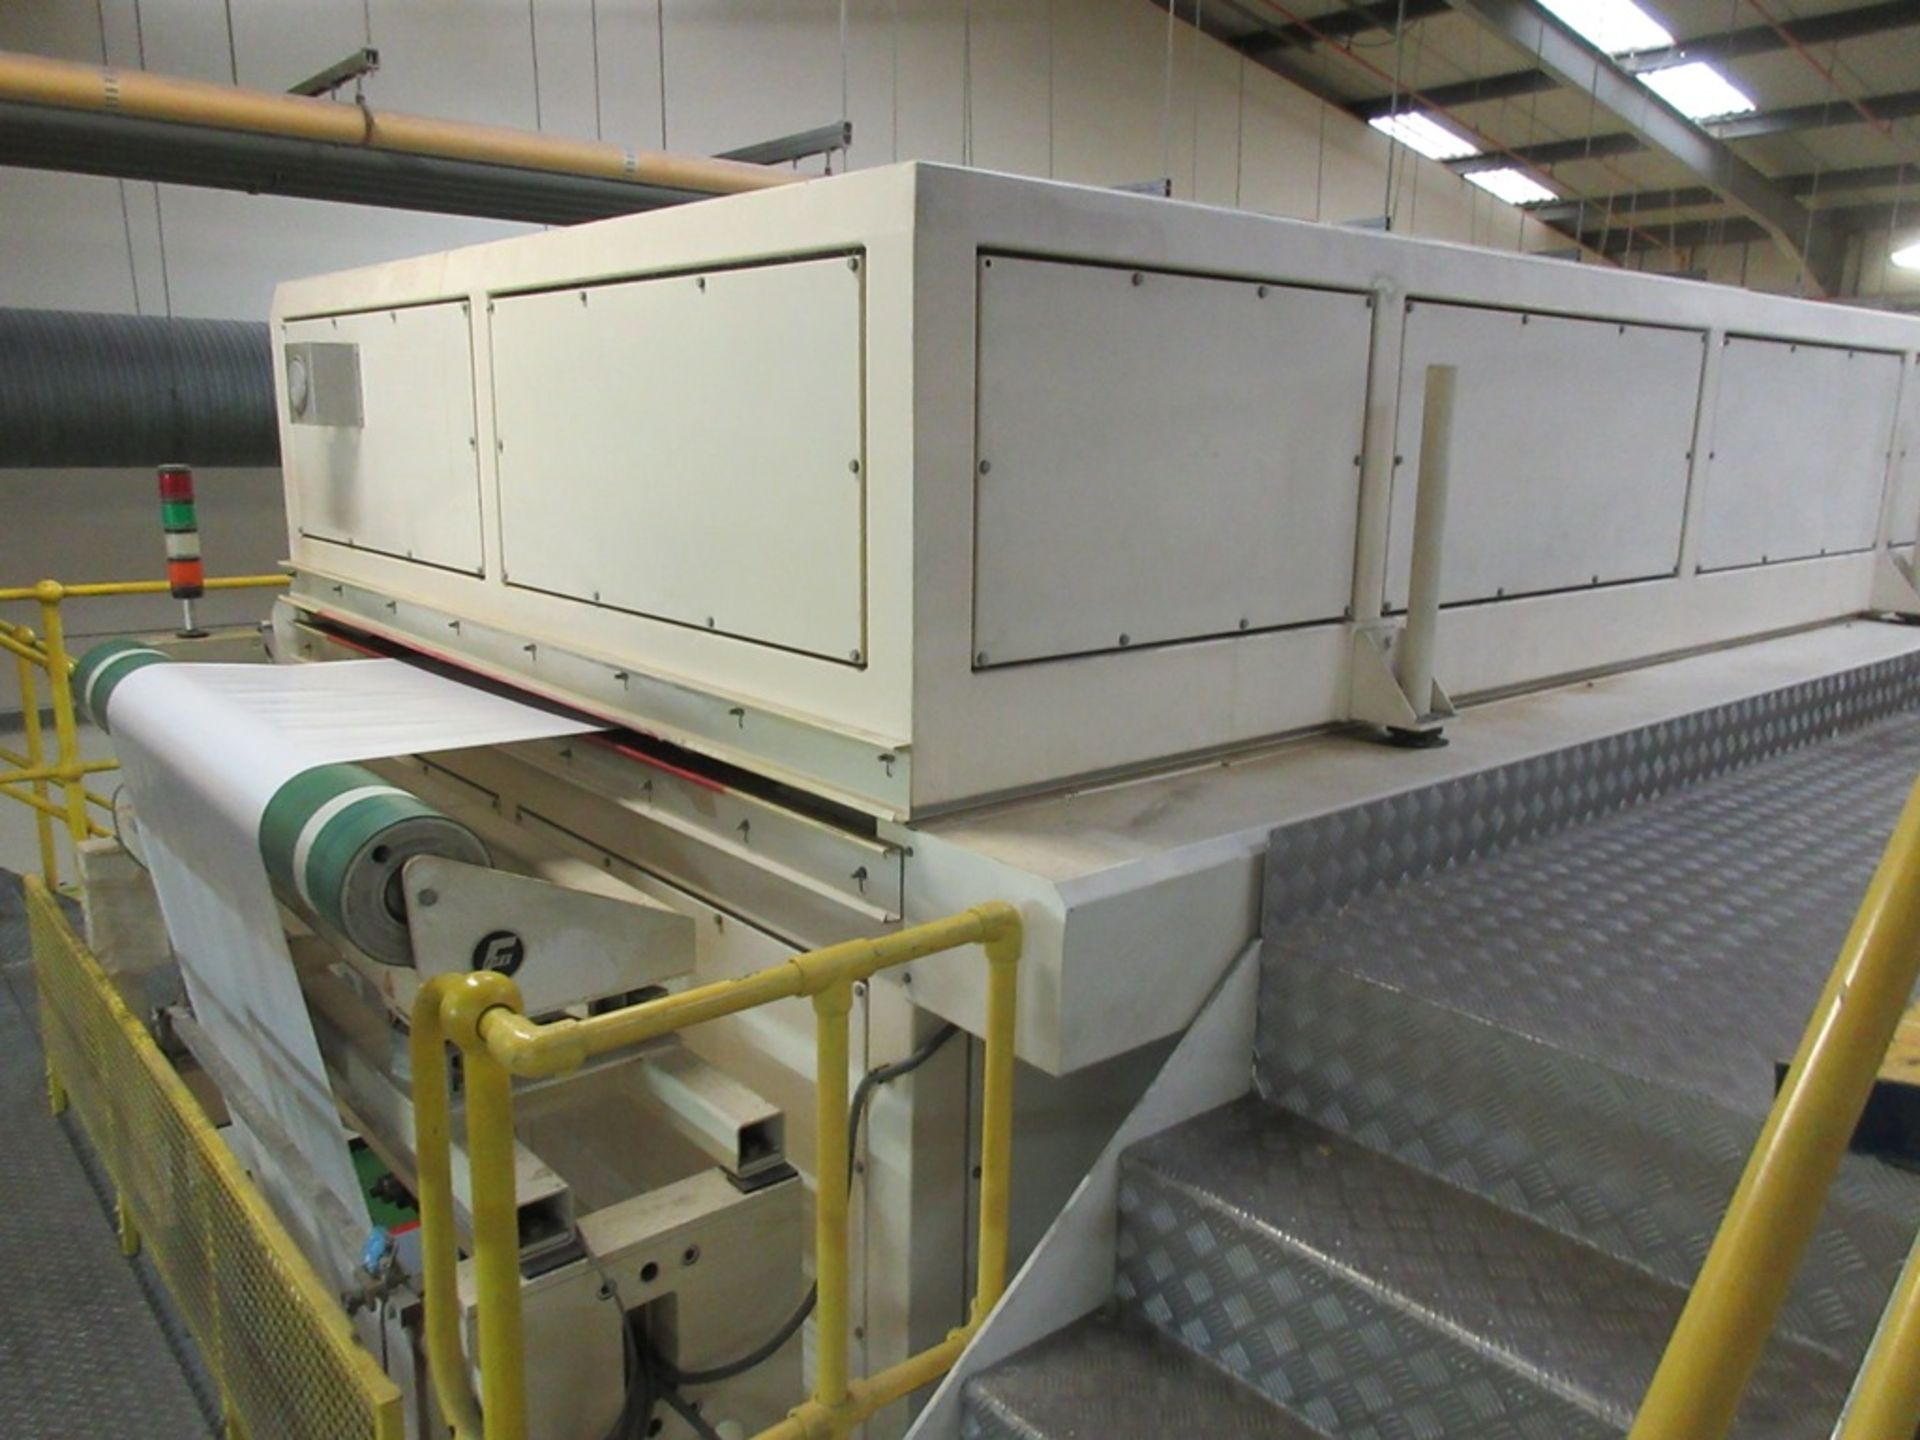 Greenbank primer rolling station and oven, contract ref: 10.226.0 (2000), approx. dimensions 6m x 3m - Image 21 of 38